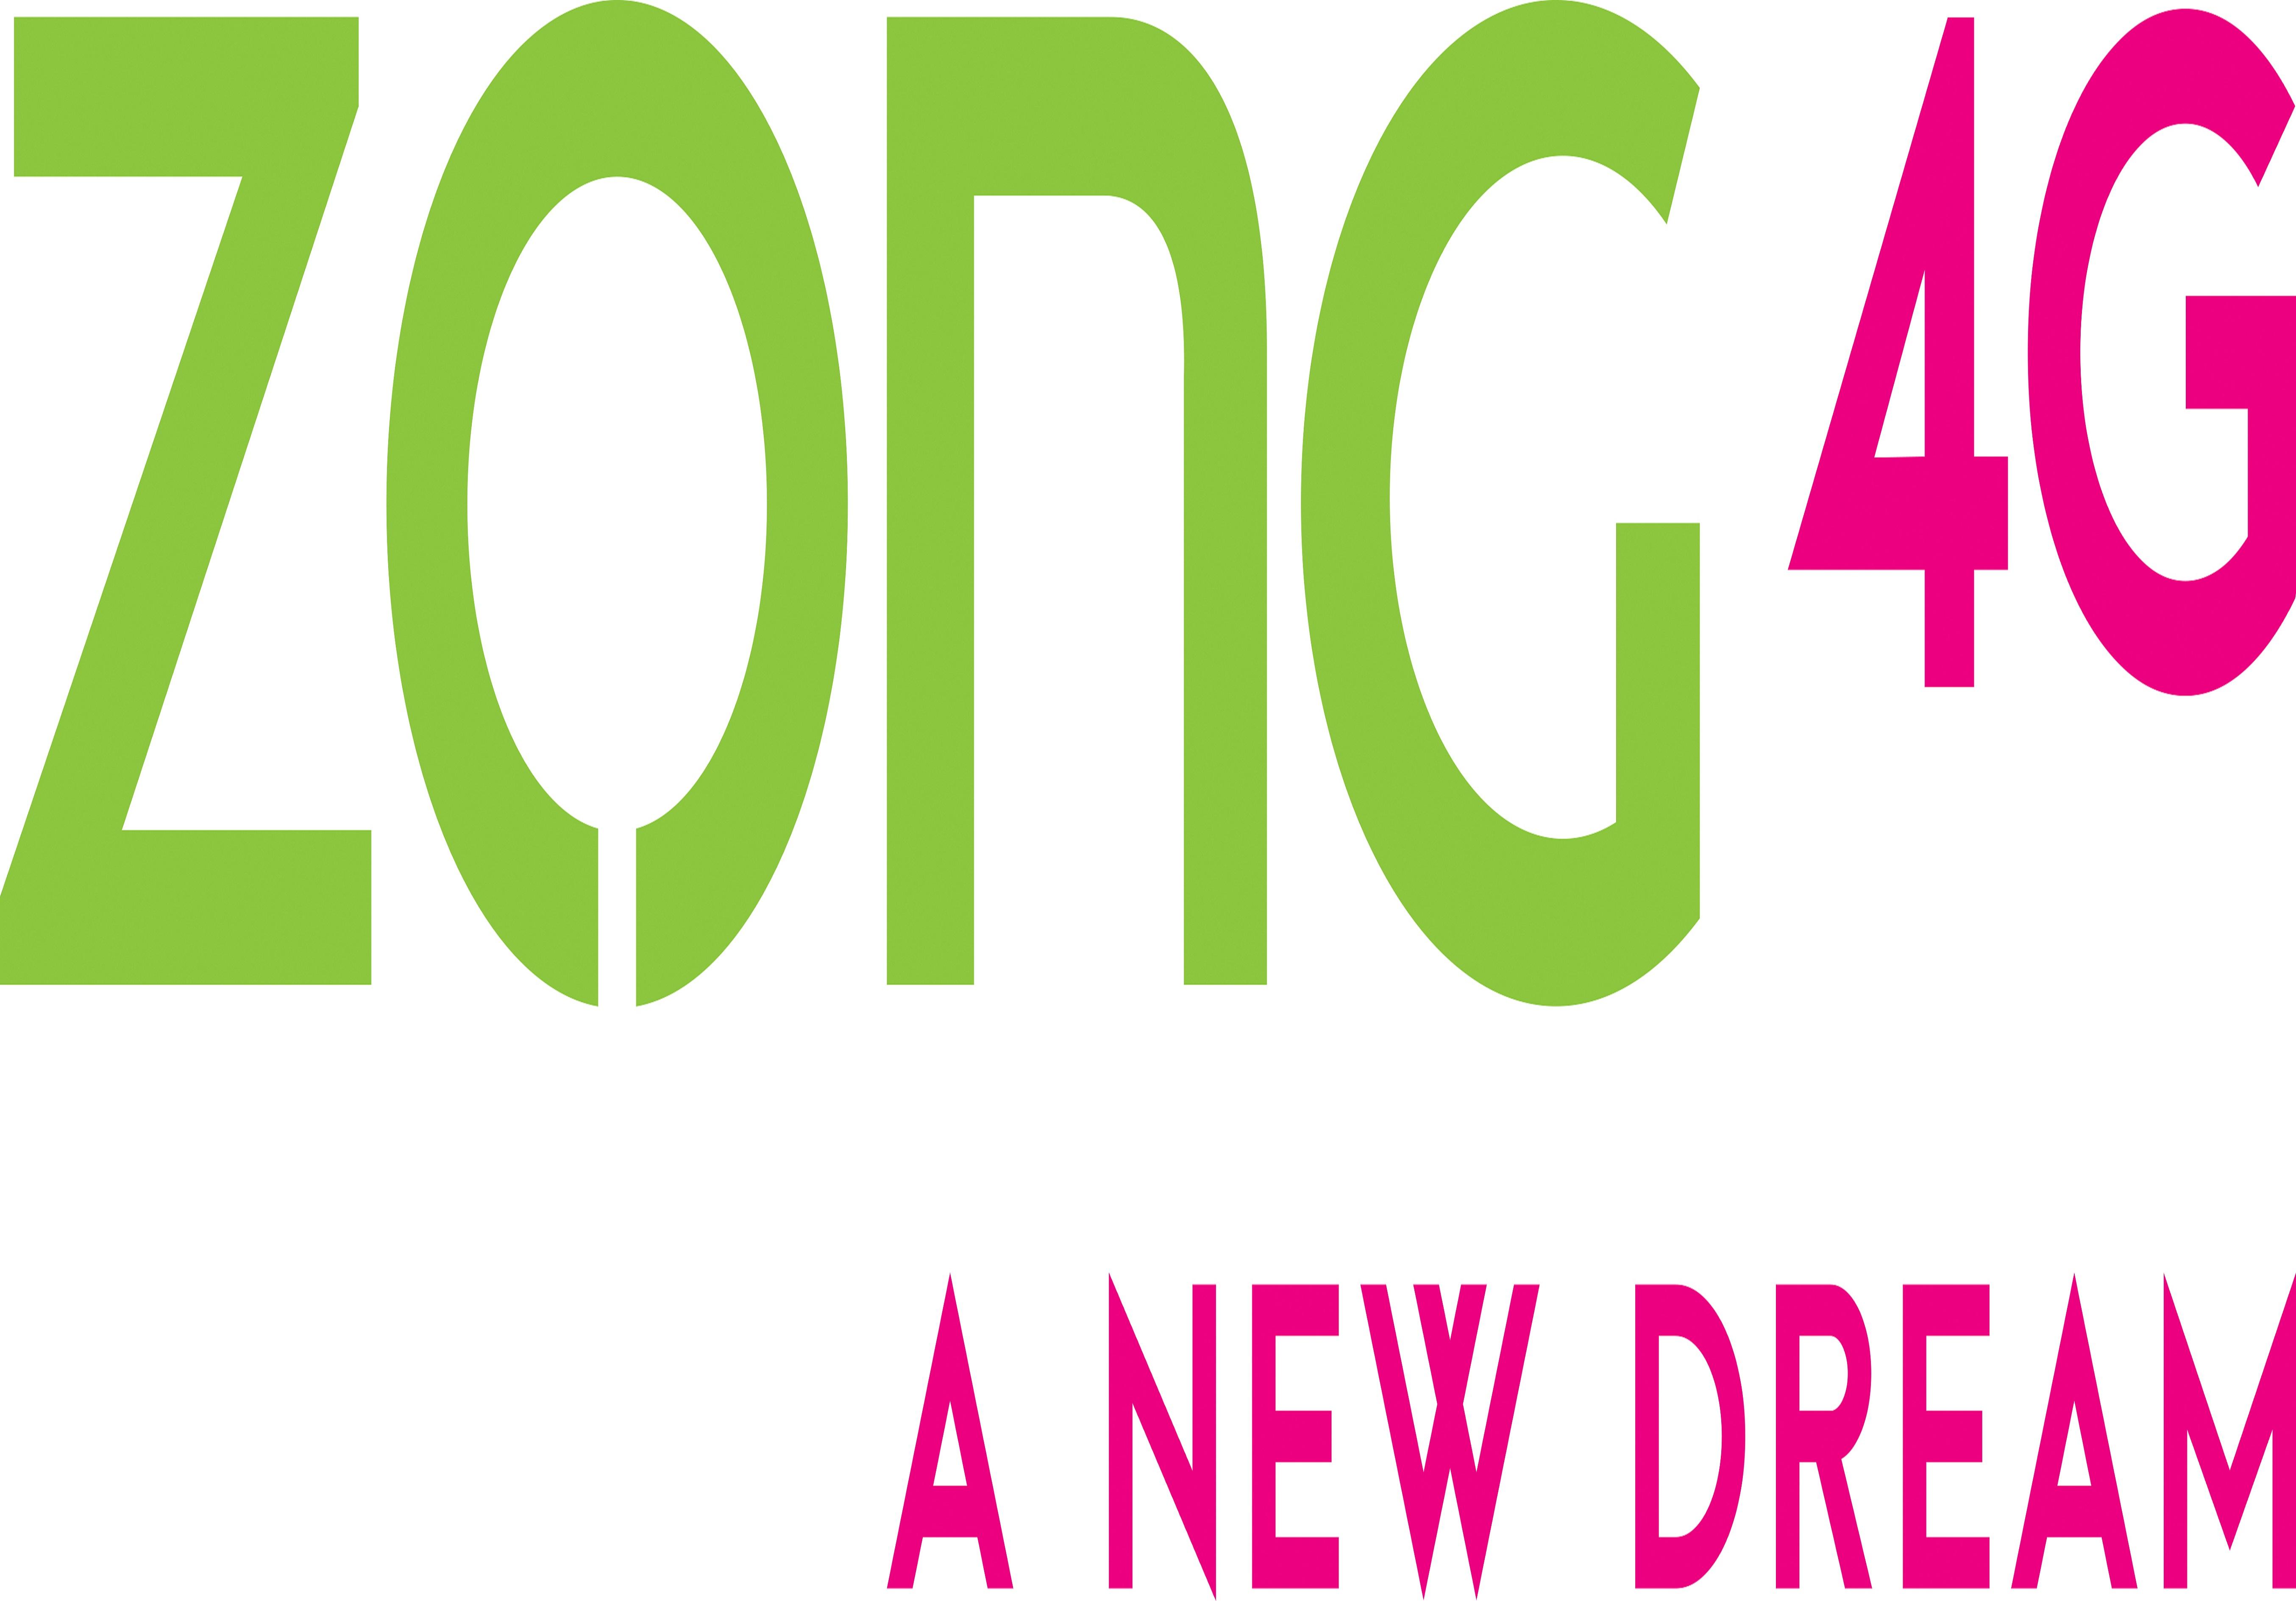 Zong 4G and SIUT join hands to relay authentic healthcare messages to the public